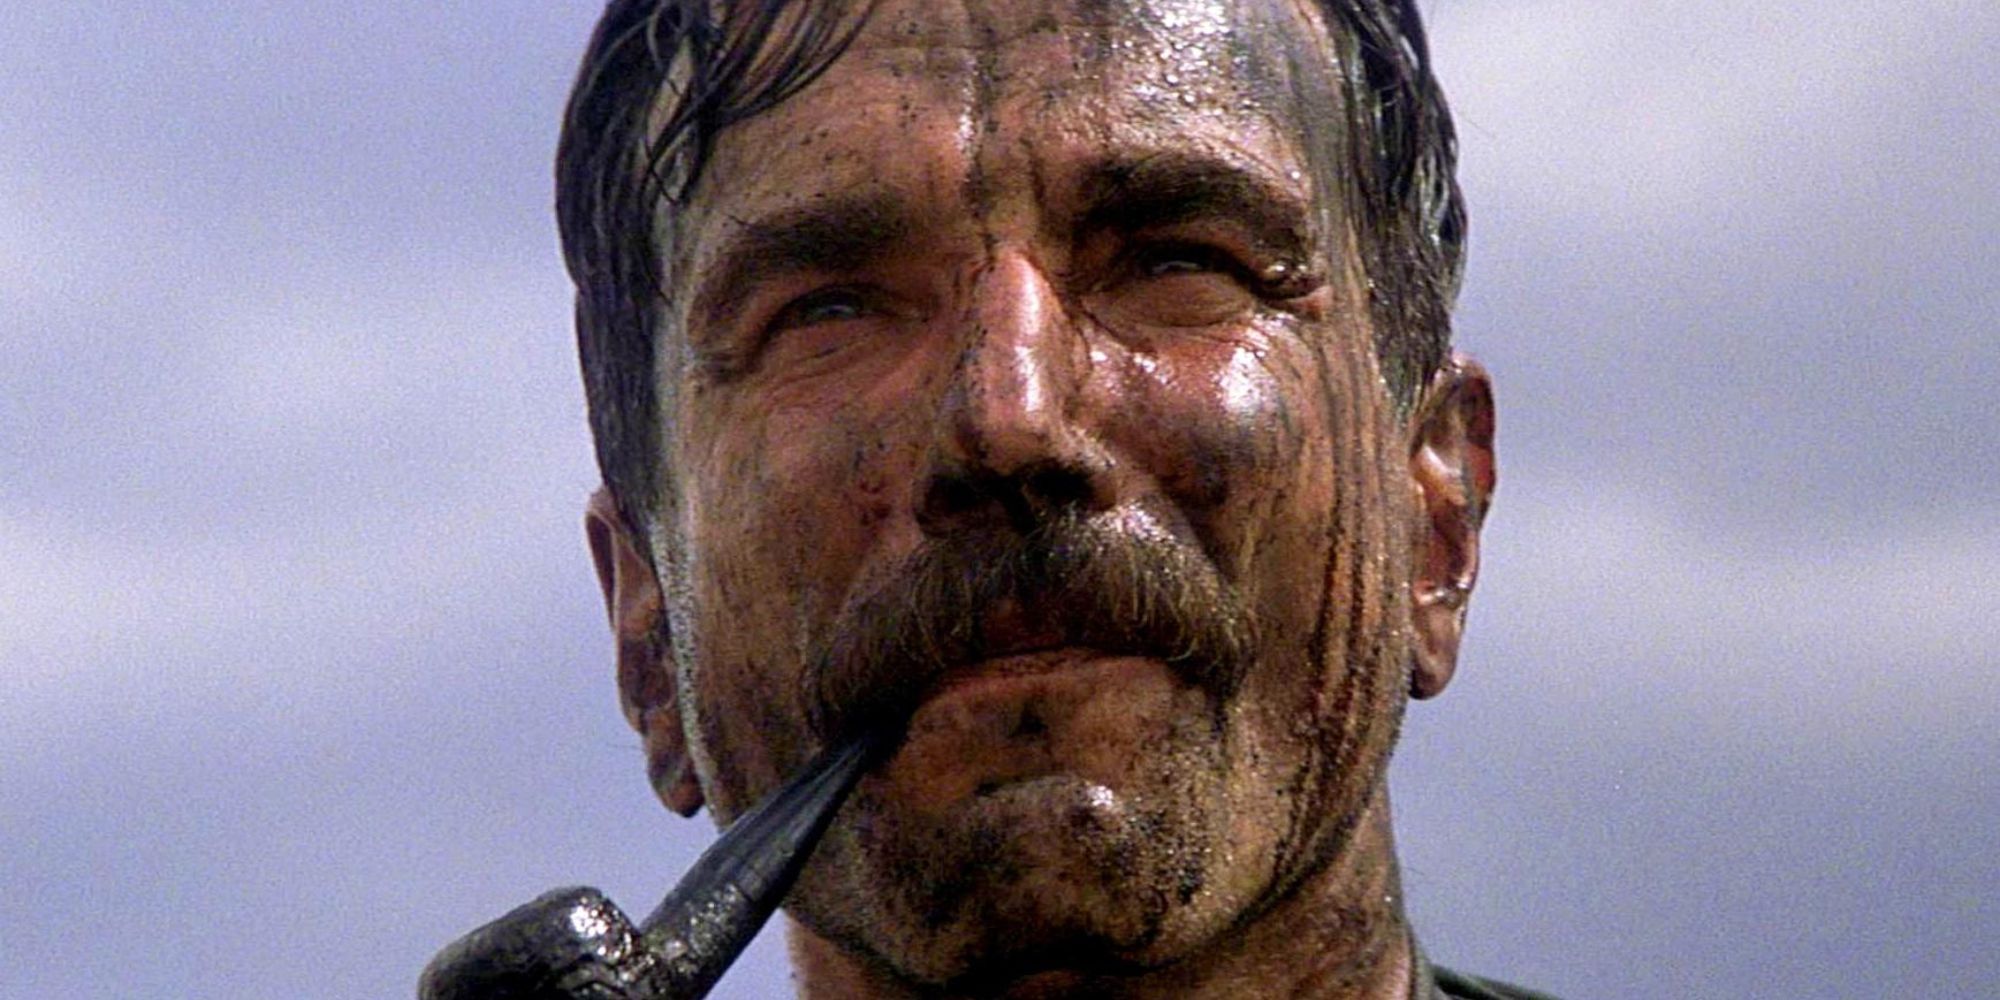 Daniel Plainview (Daniel Day-Lewis) covered in oil in There Will Be Blood.